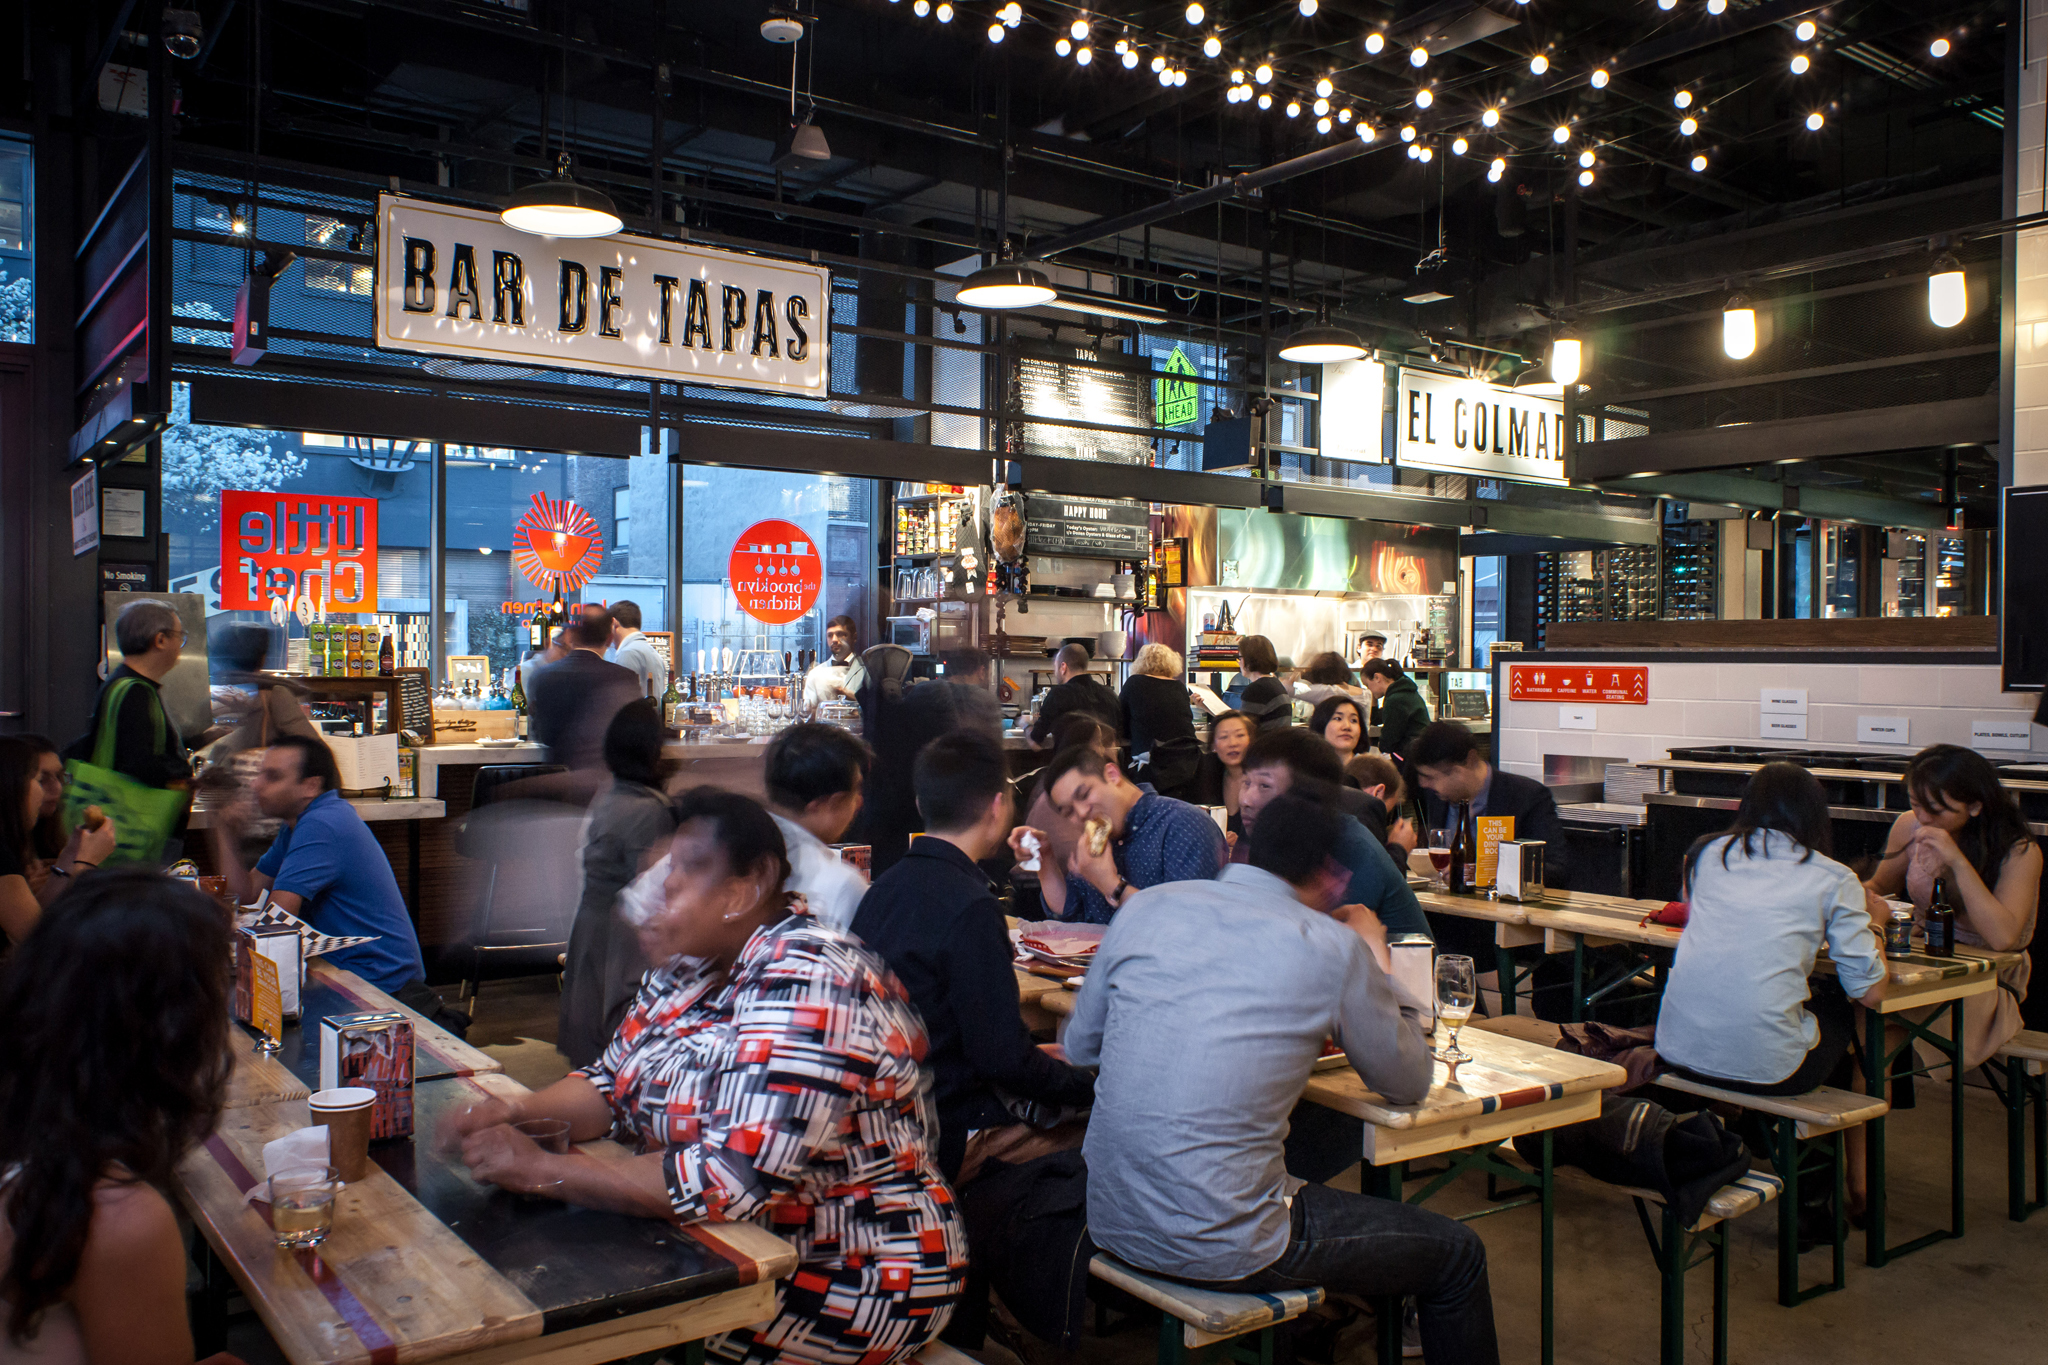 Places to eat: The food court gets a boost in New York City